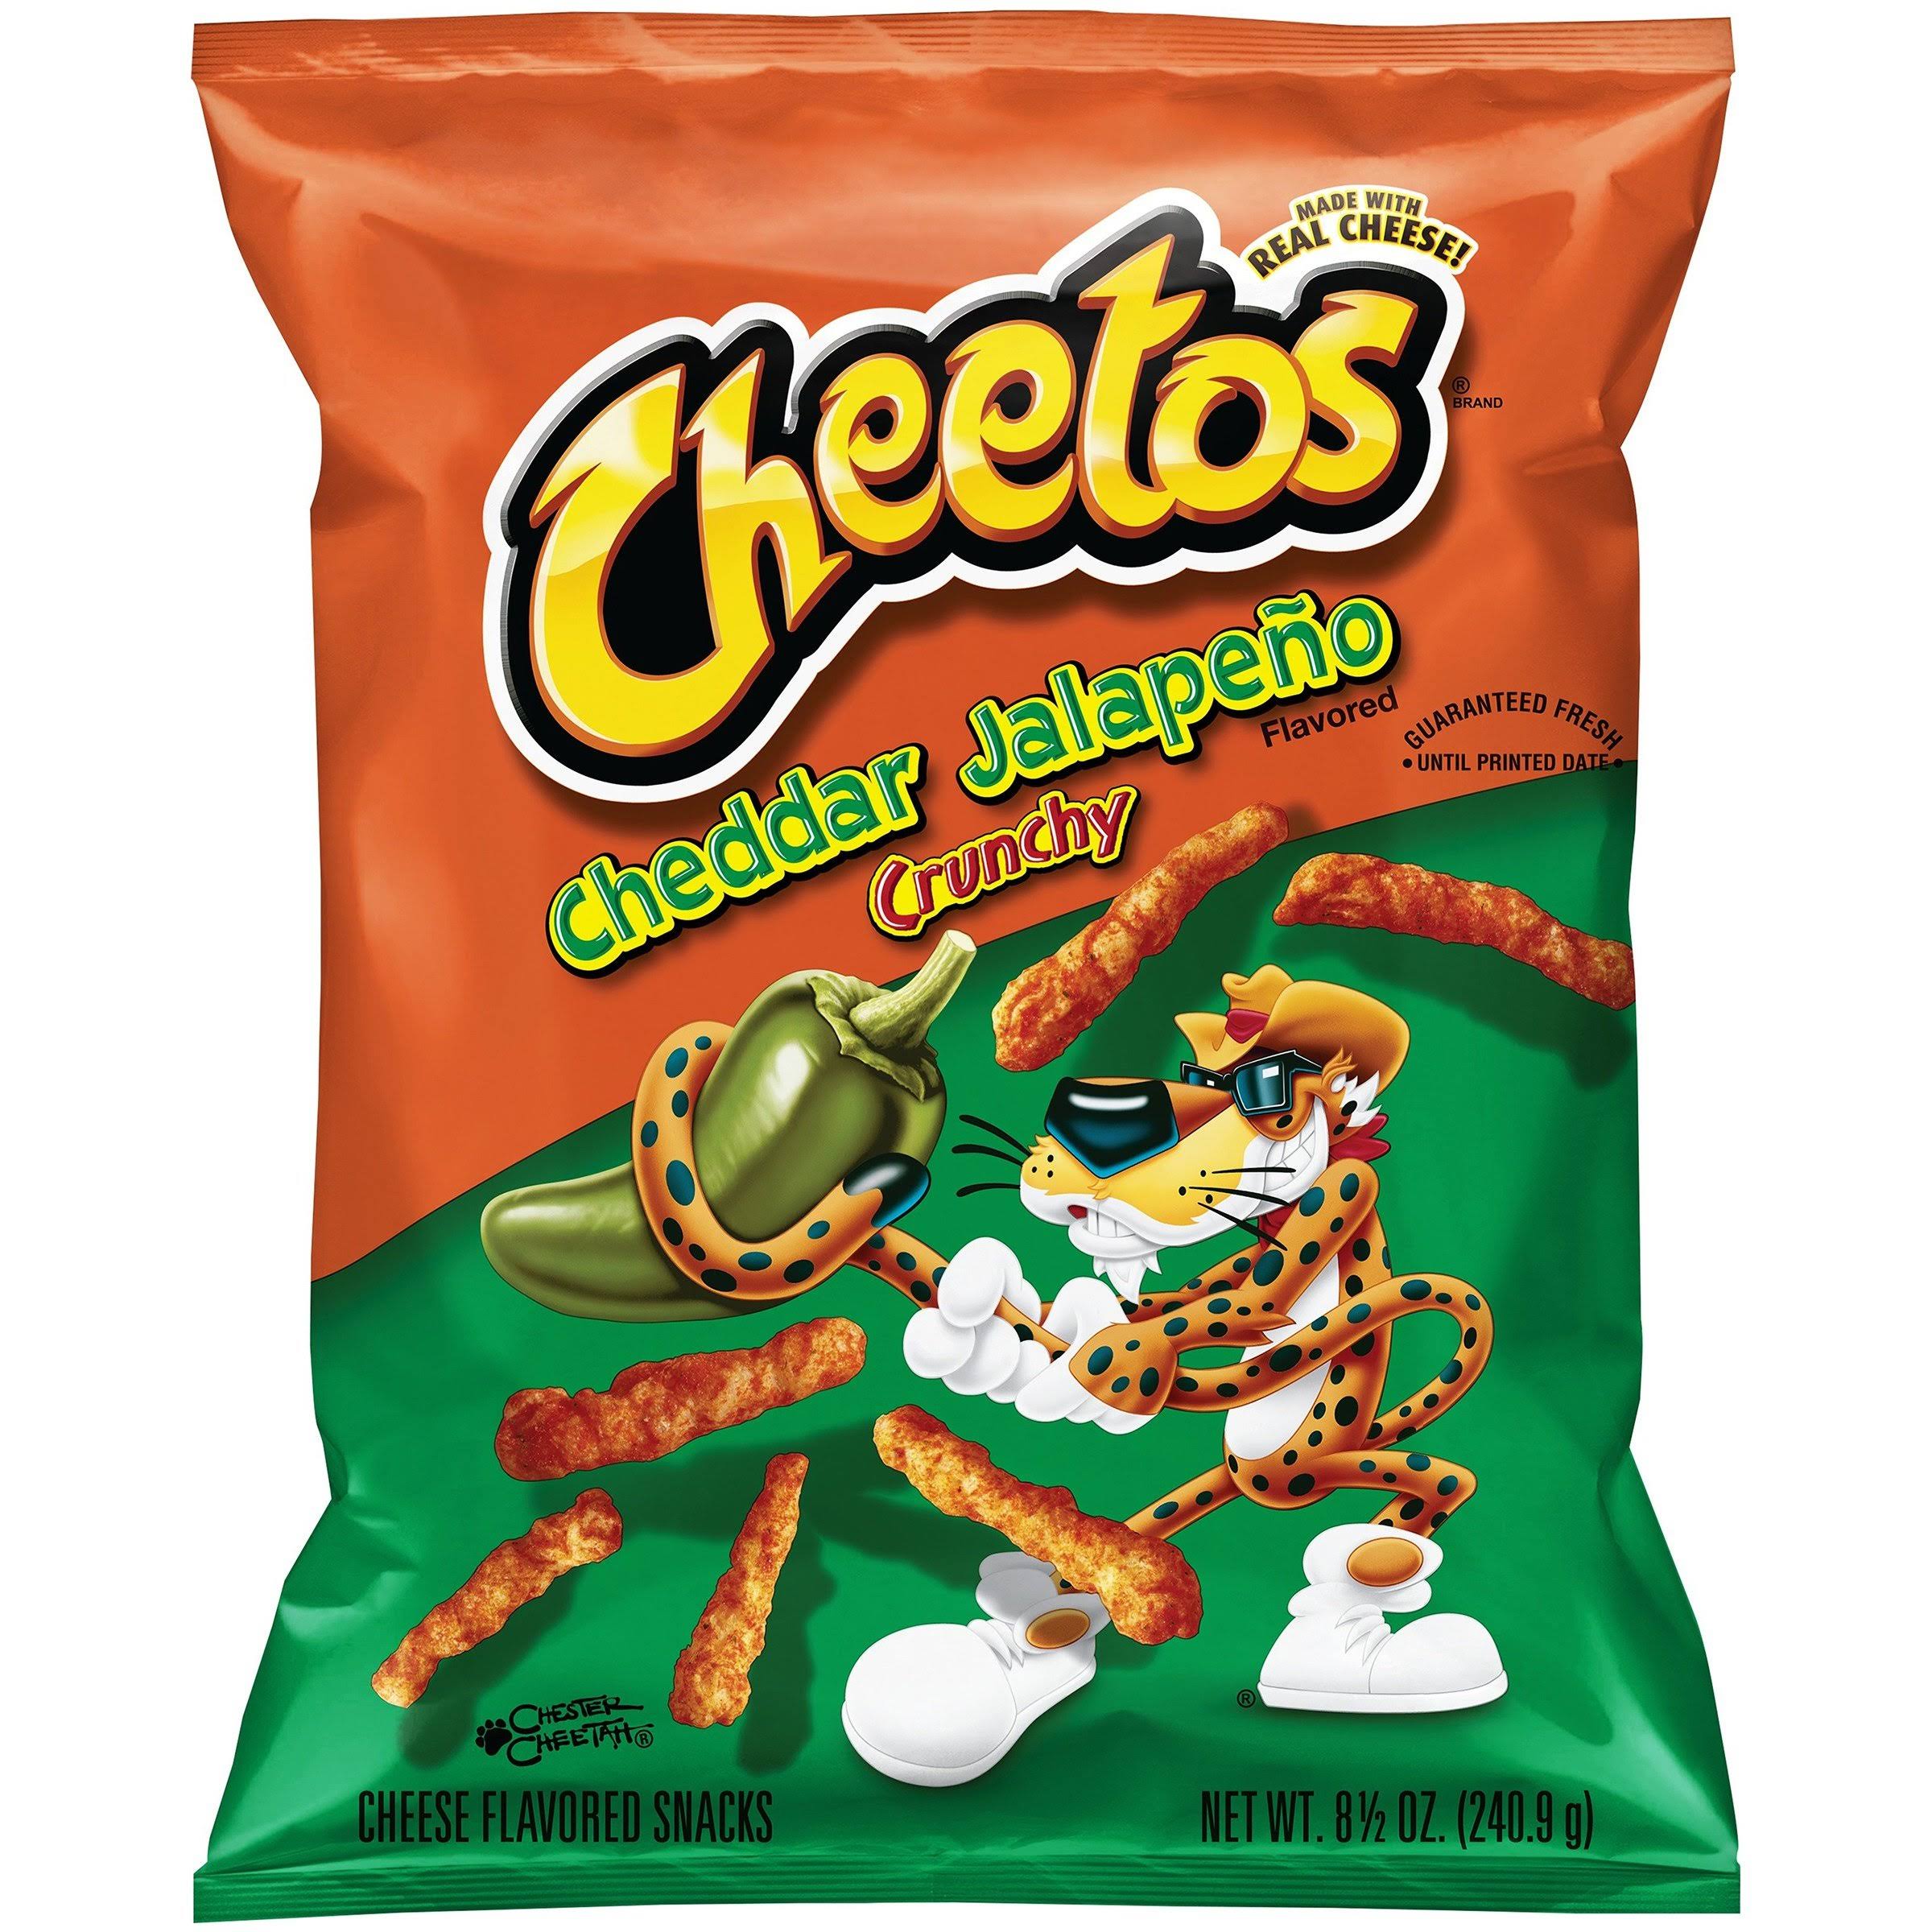 Cheetos Cheddar Jalapeno Crunchy Cheese Flavored Snacks - 240.8g